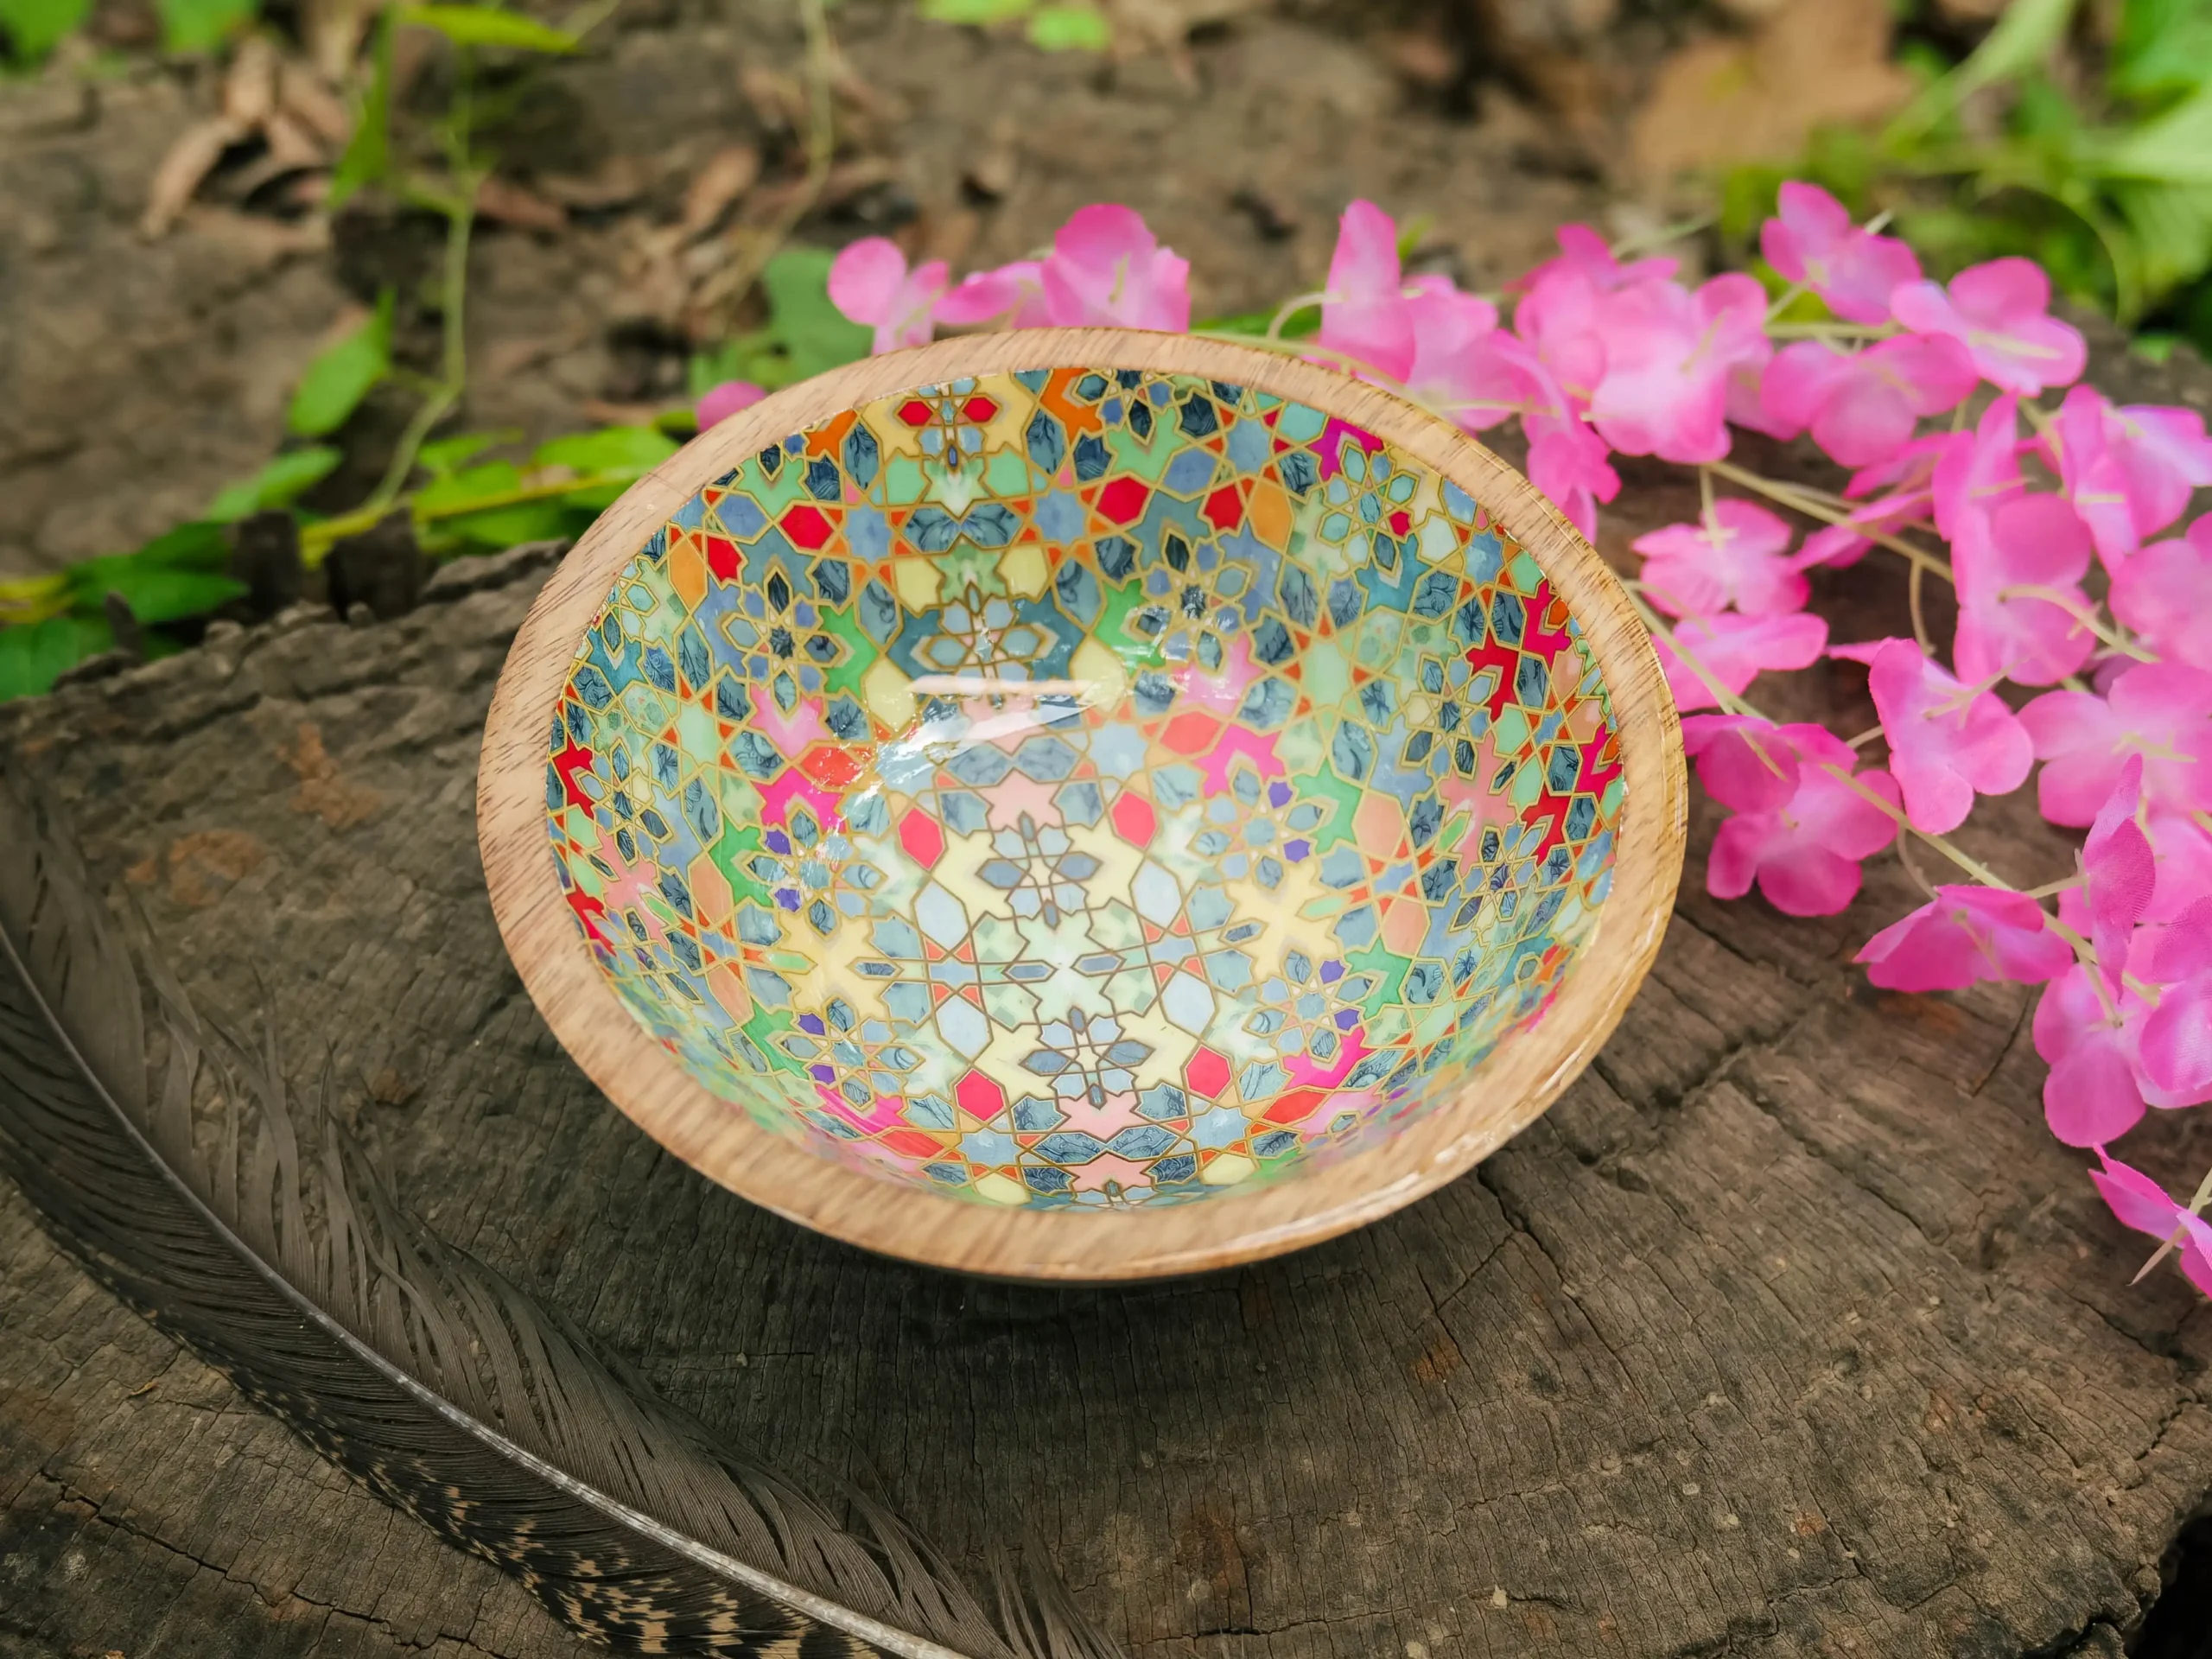 Online handcrafted wooden bowl usa